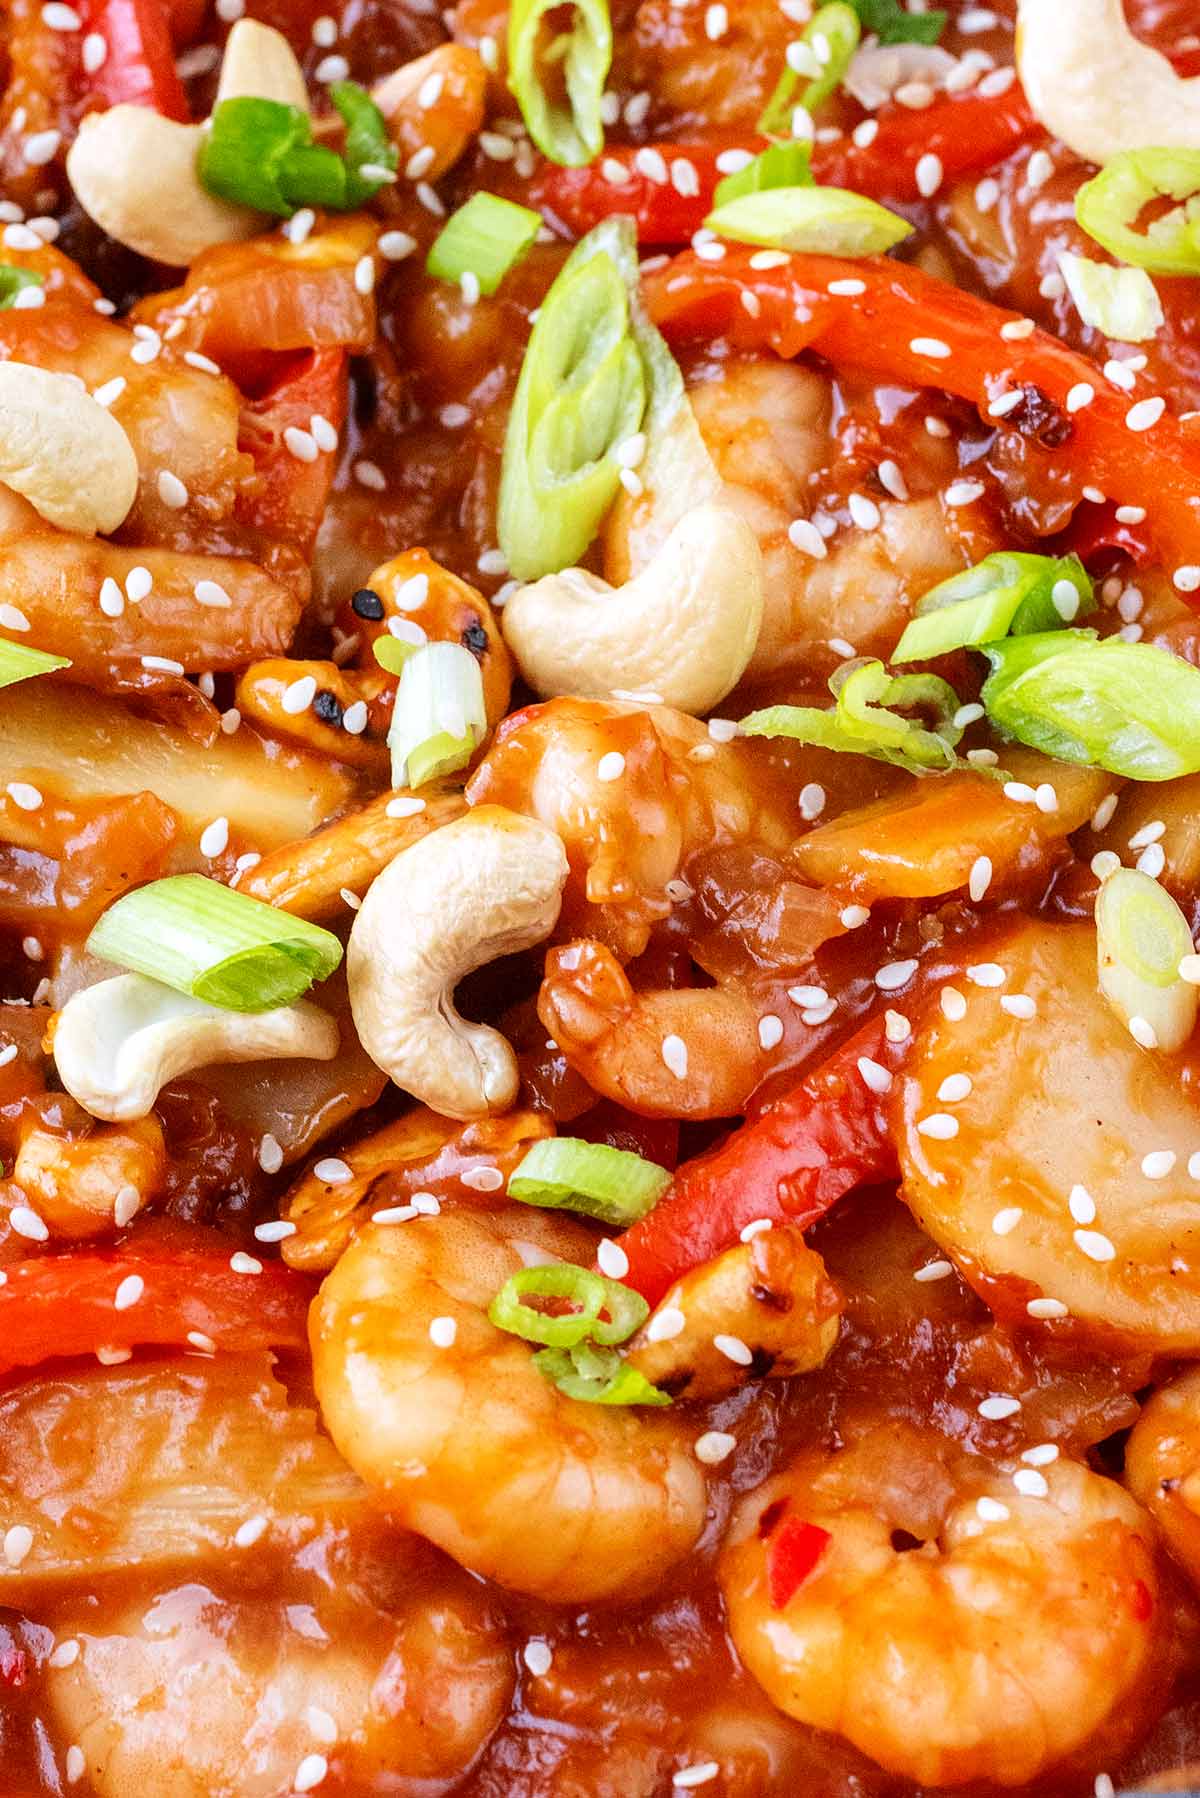 Cashew nuts, sliced spring onions and sesame seeds on top of kung po prawns.